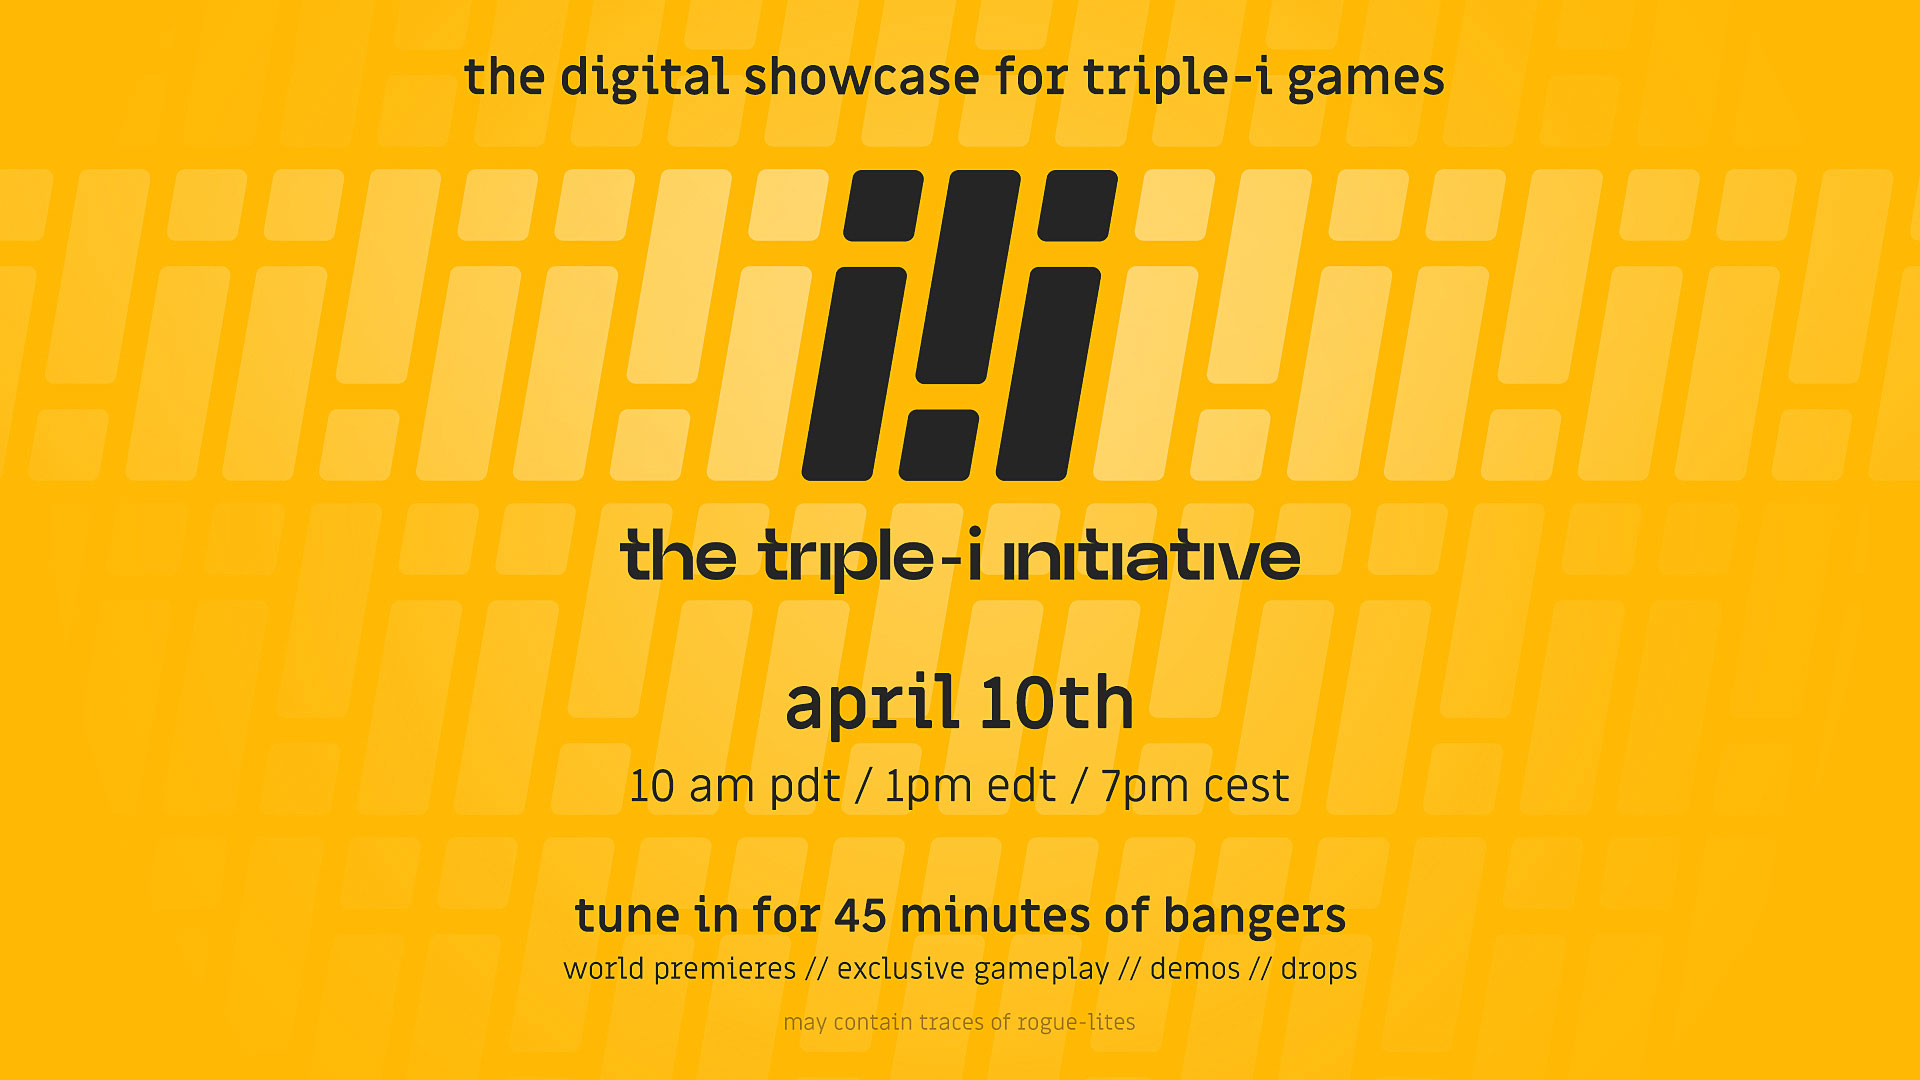 The Triple-i Initiative is a new digital showcase focused on indie games